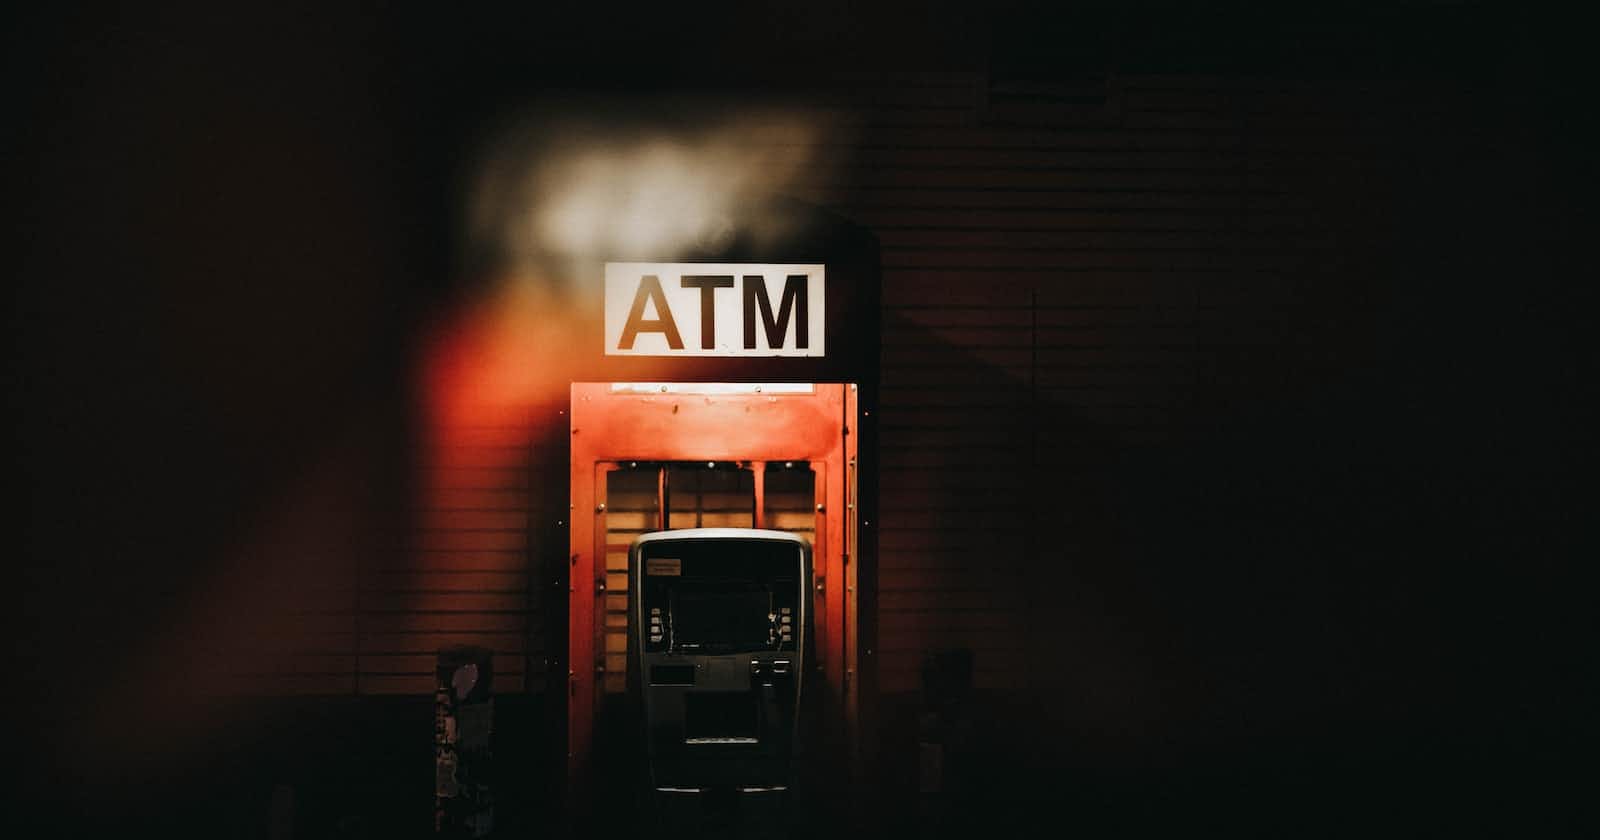 The Operation of Cardless ATMs